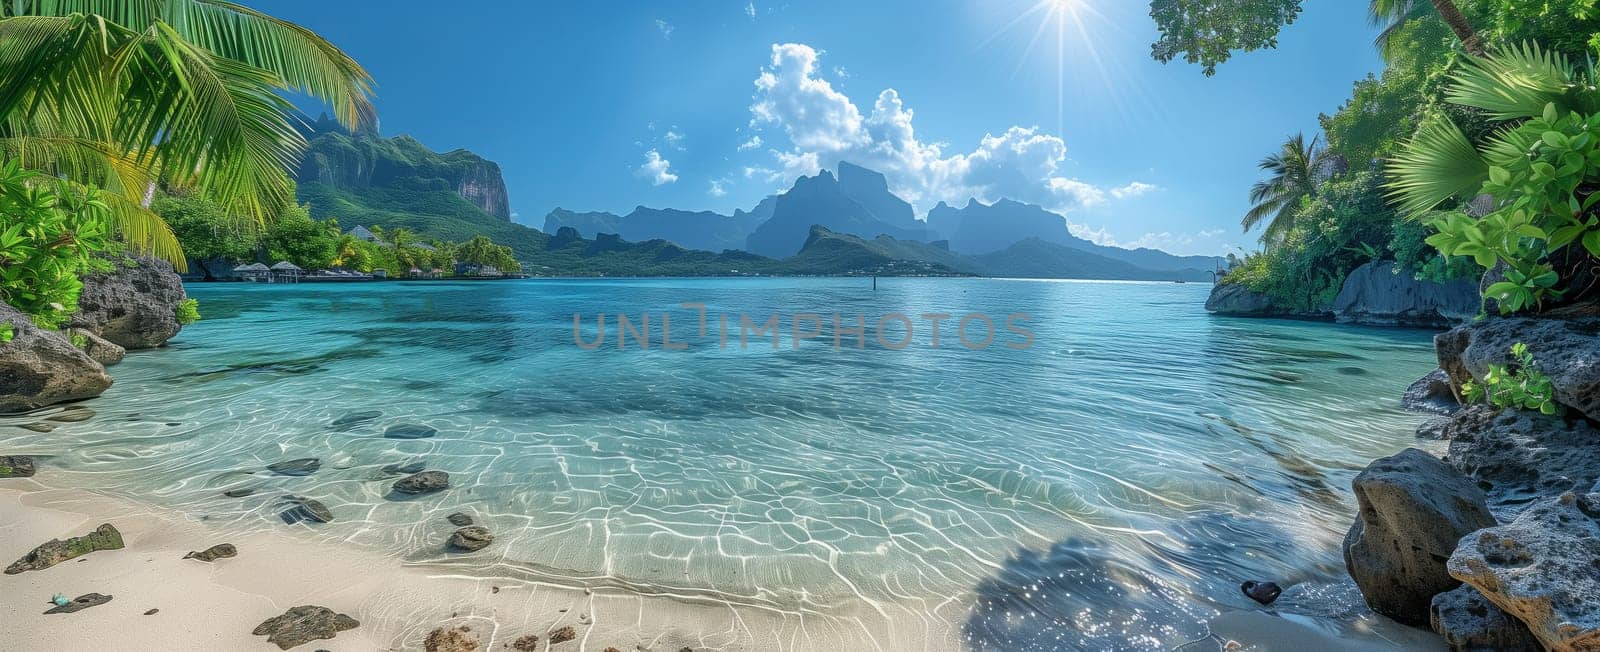 a tropical beach with a body of water and mountains in the background by richwolf